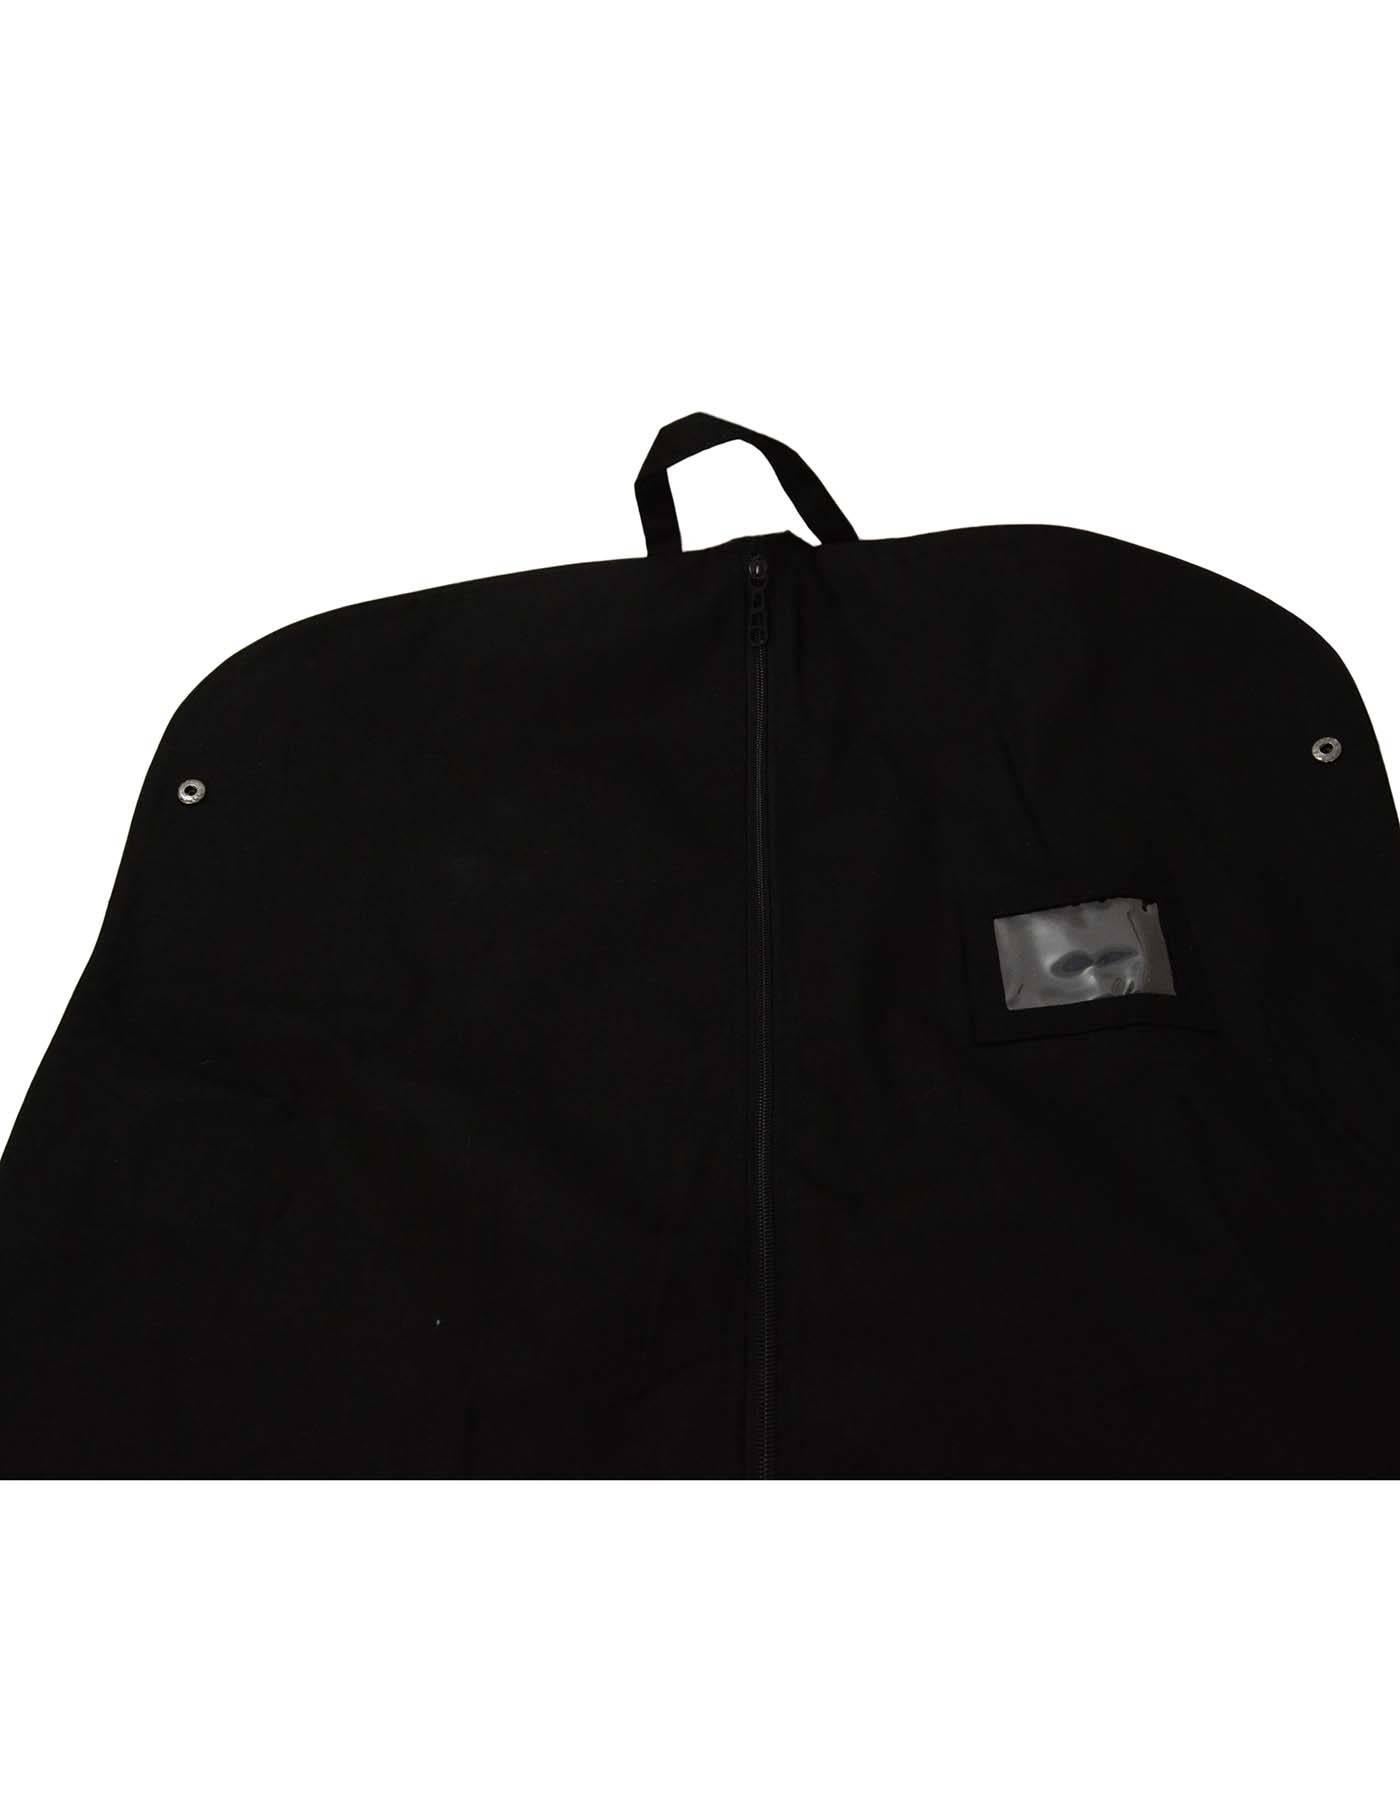 Chanel Black Canvas Garment Bag 
Features snaps to fold in half securely, handles and loop to hang on hook
Color: Black
Materials: Canvas
Closure/Opening: Center zip down
Exterior Pockets: None
Interior Pockets: None
Overall Condition: